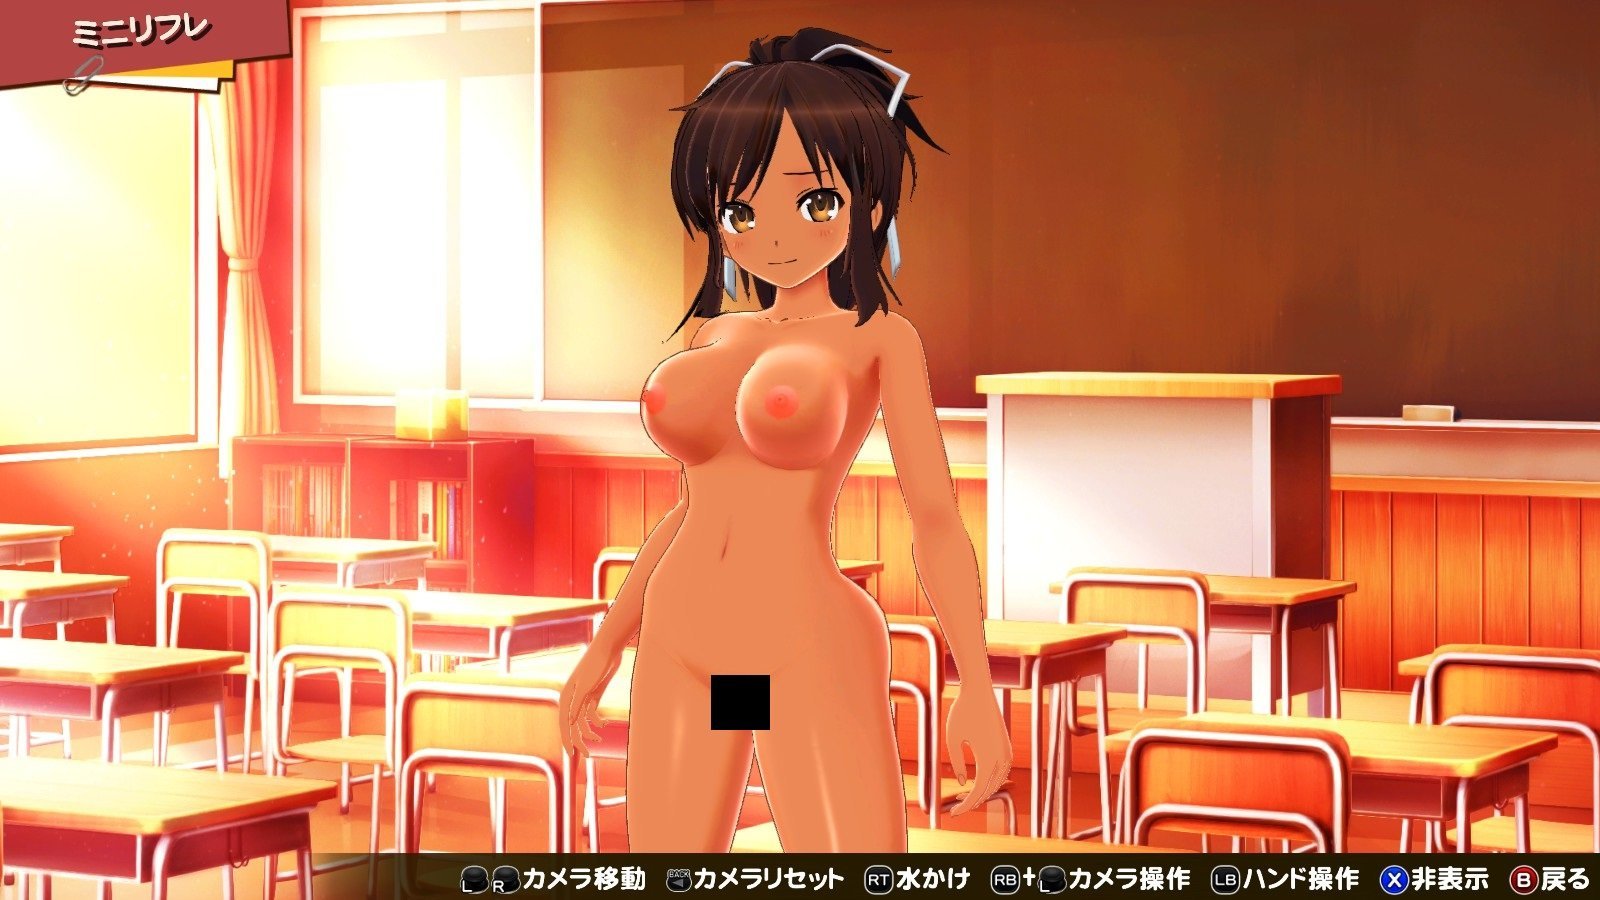 is it time for nude mods? https://store.steampowered.com/app/981770/SENRAN_KAGURA...